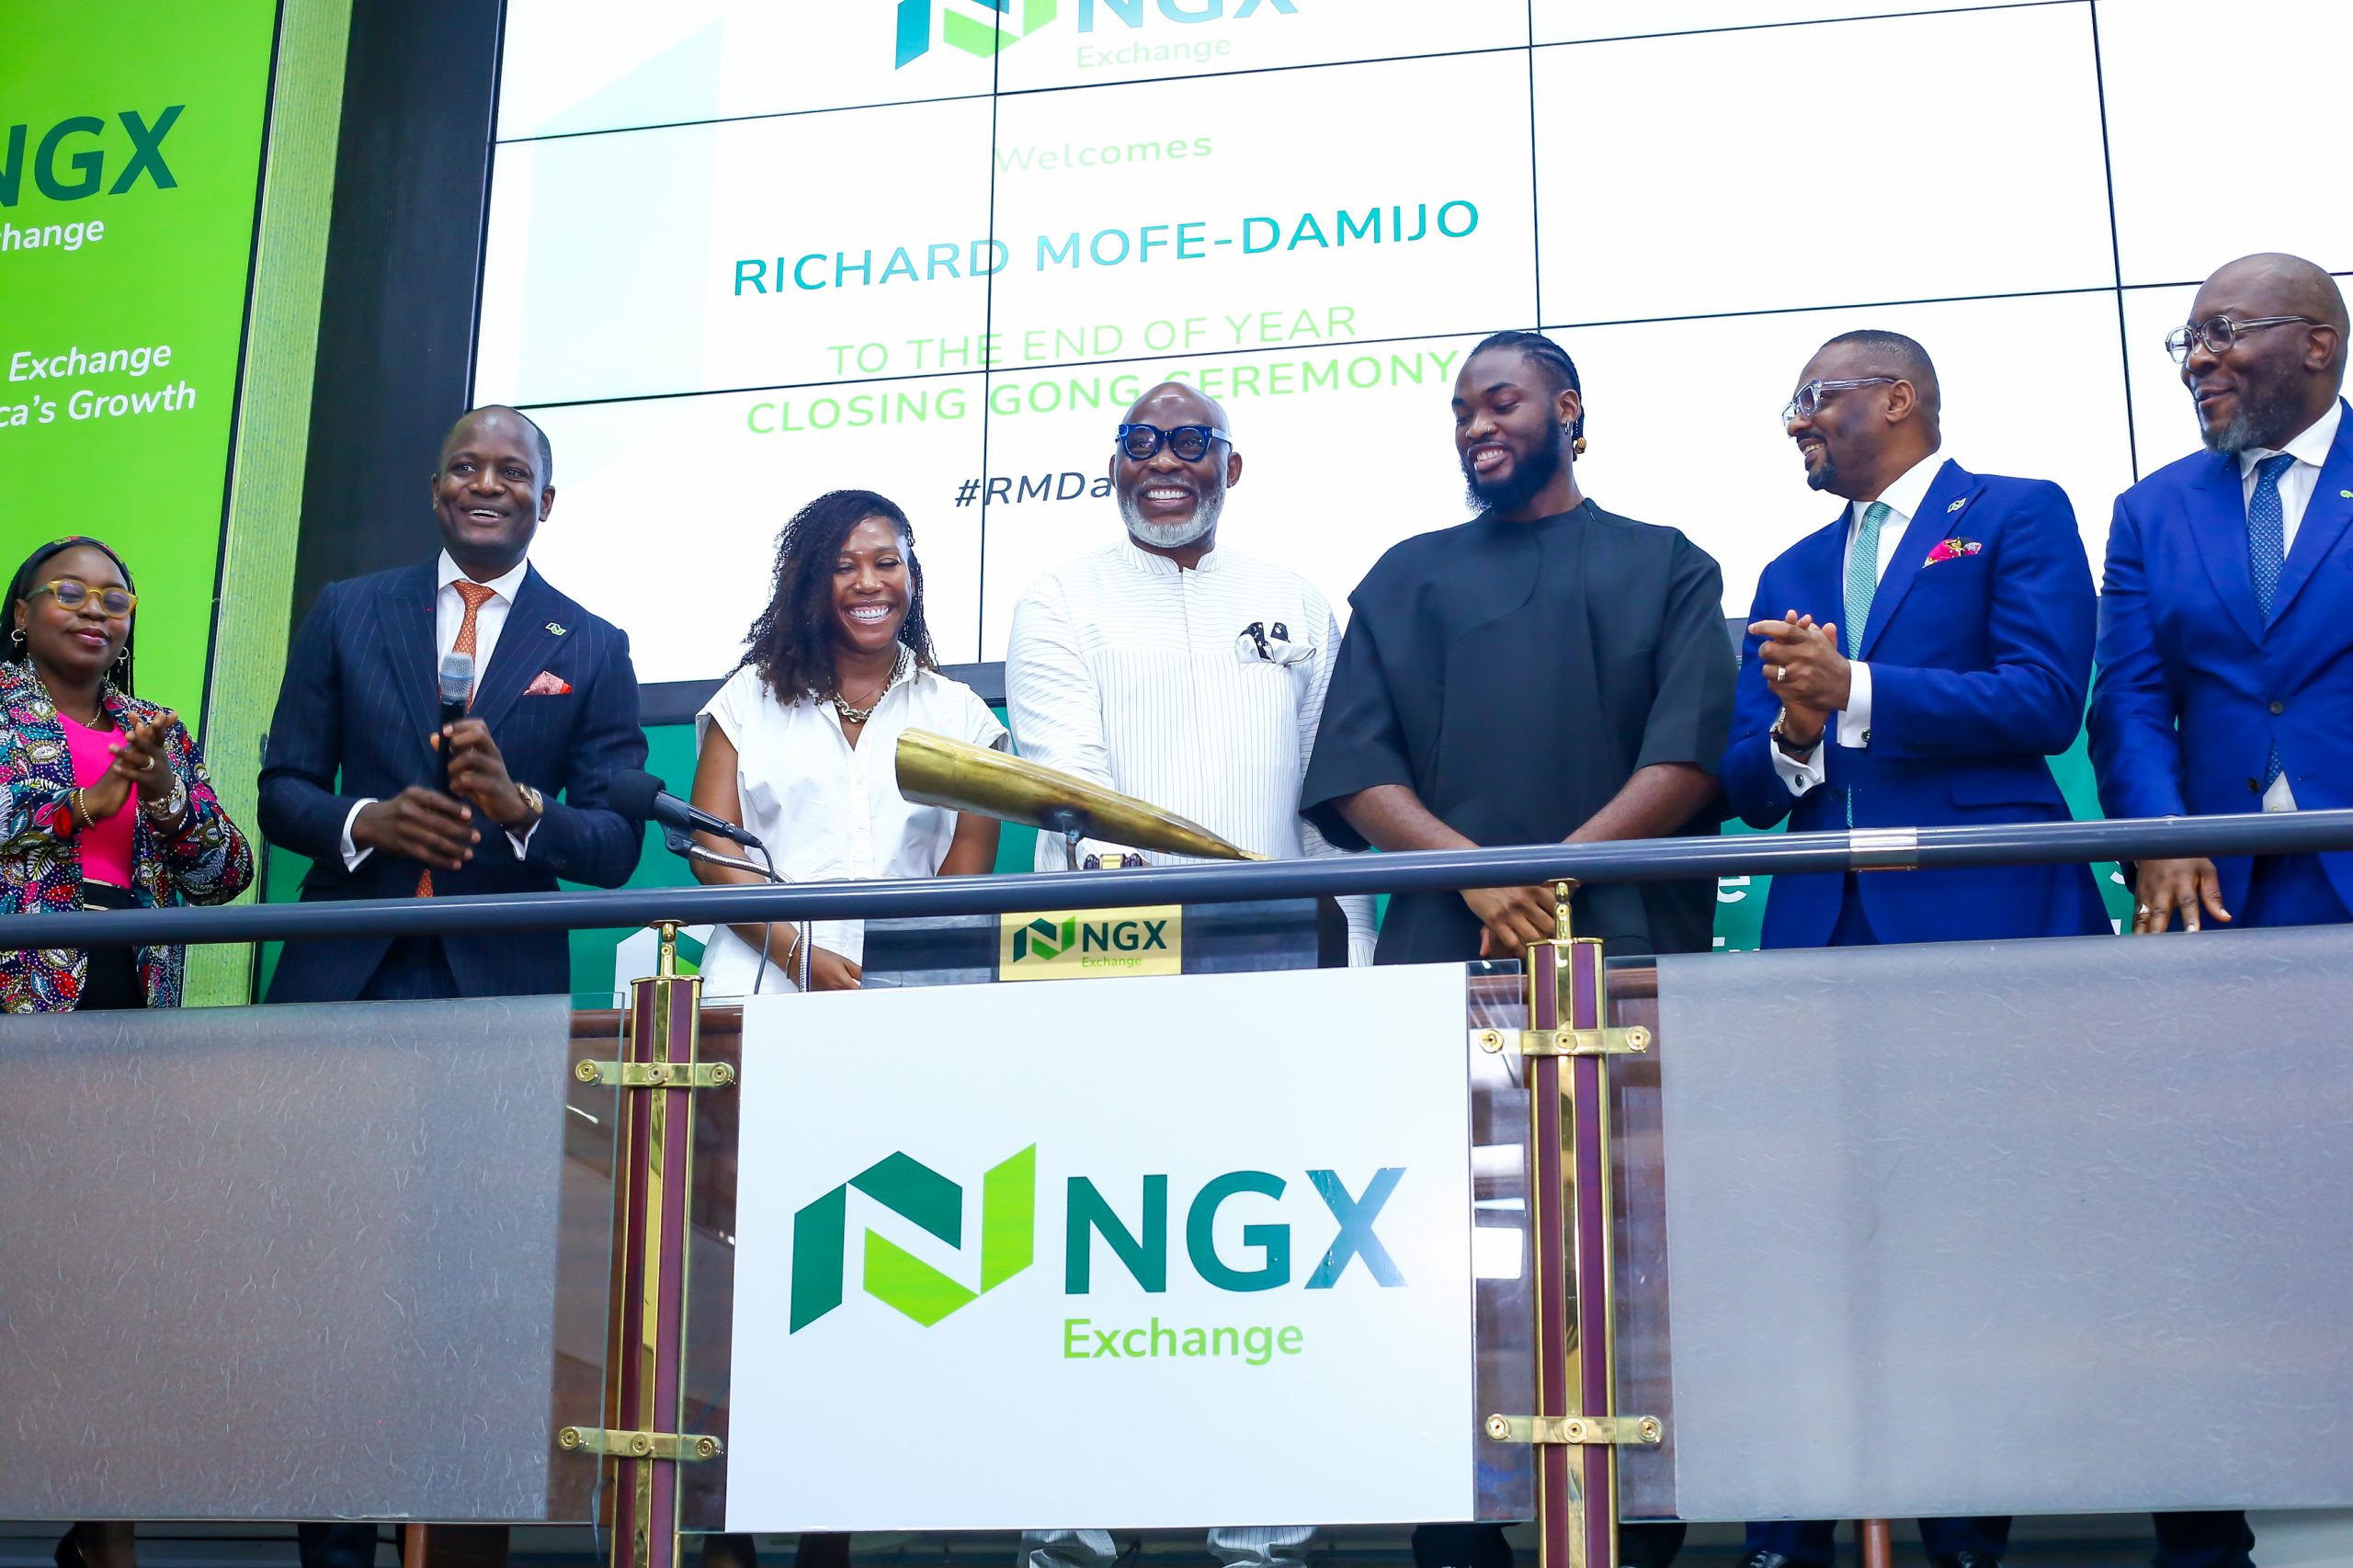 2023 Year End Closing Gong Ceremony with Richard Mofe-Damijo